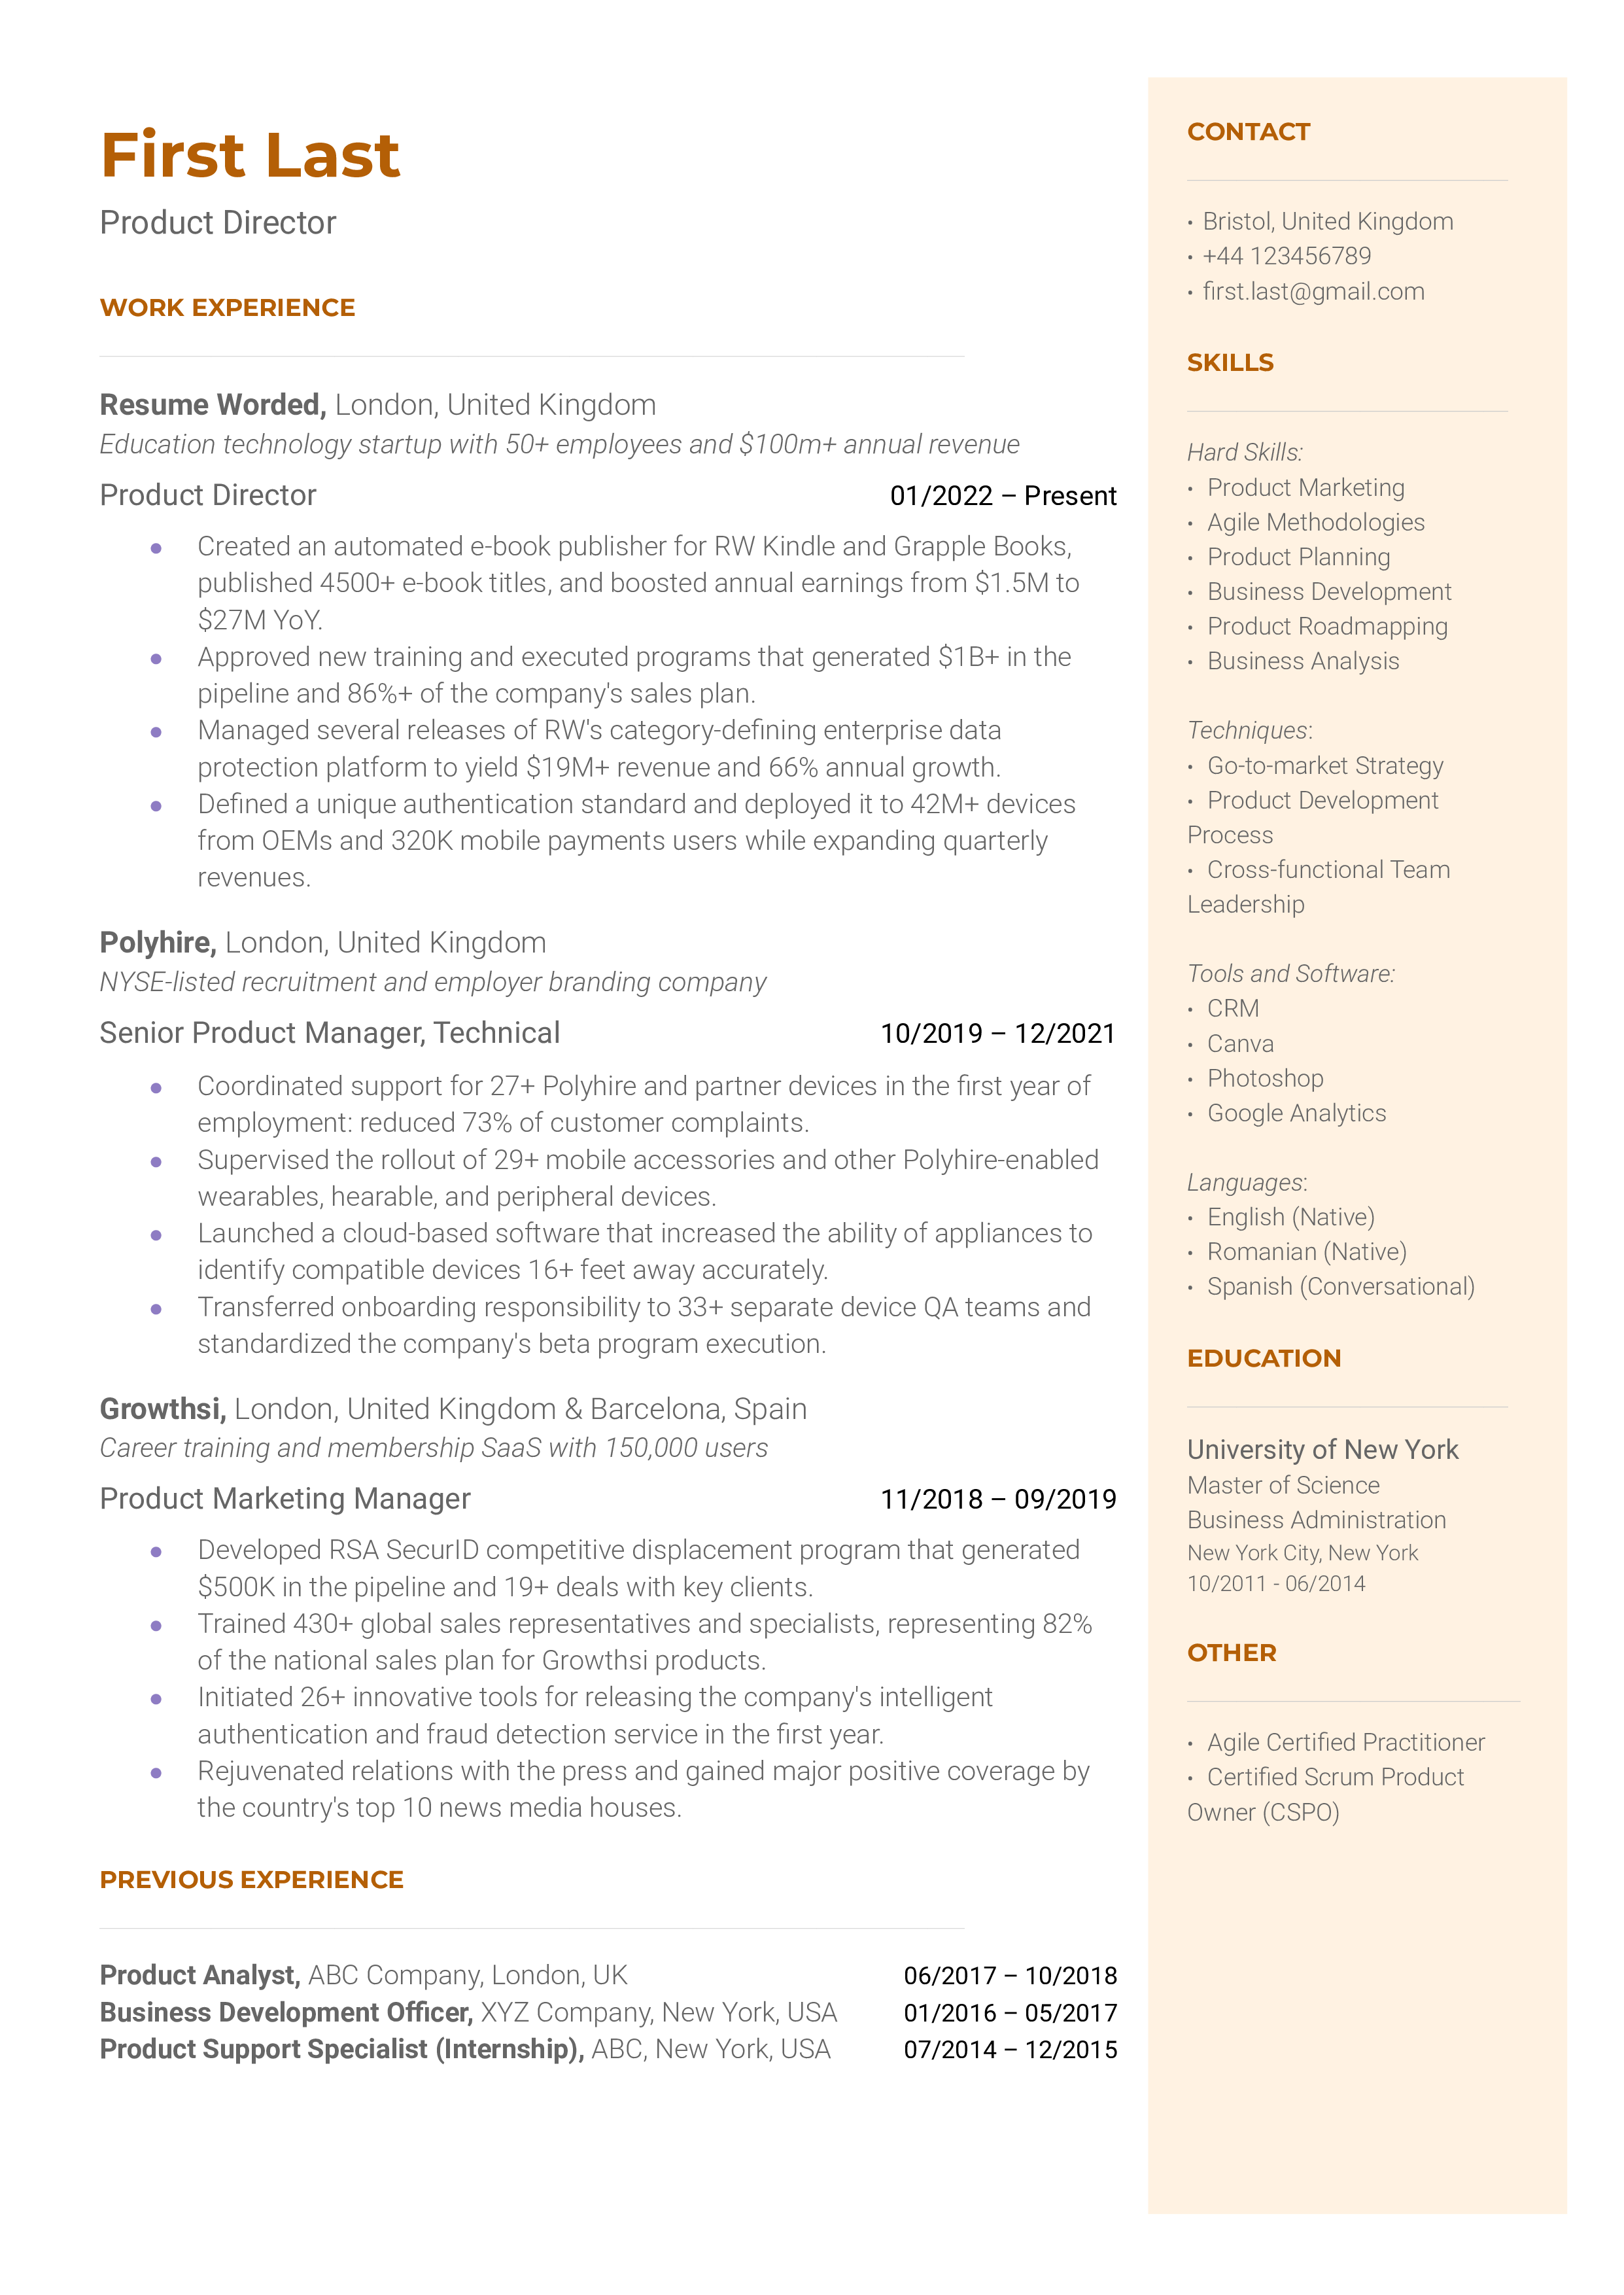 A product director resume sample that highlights the candidate’s language proficiencies and experience.